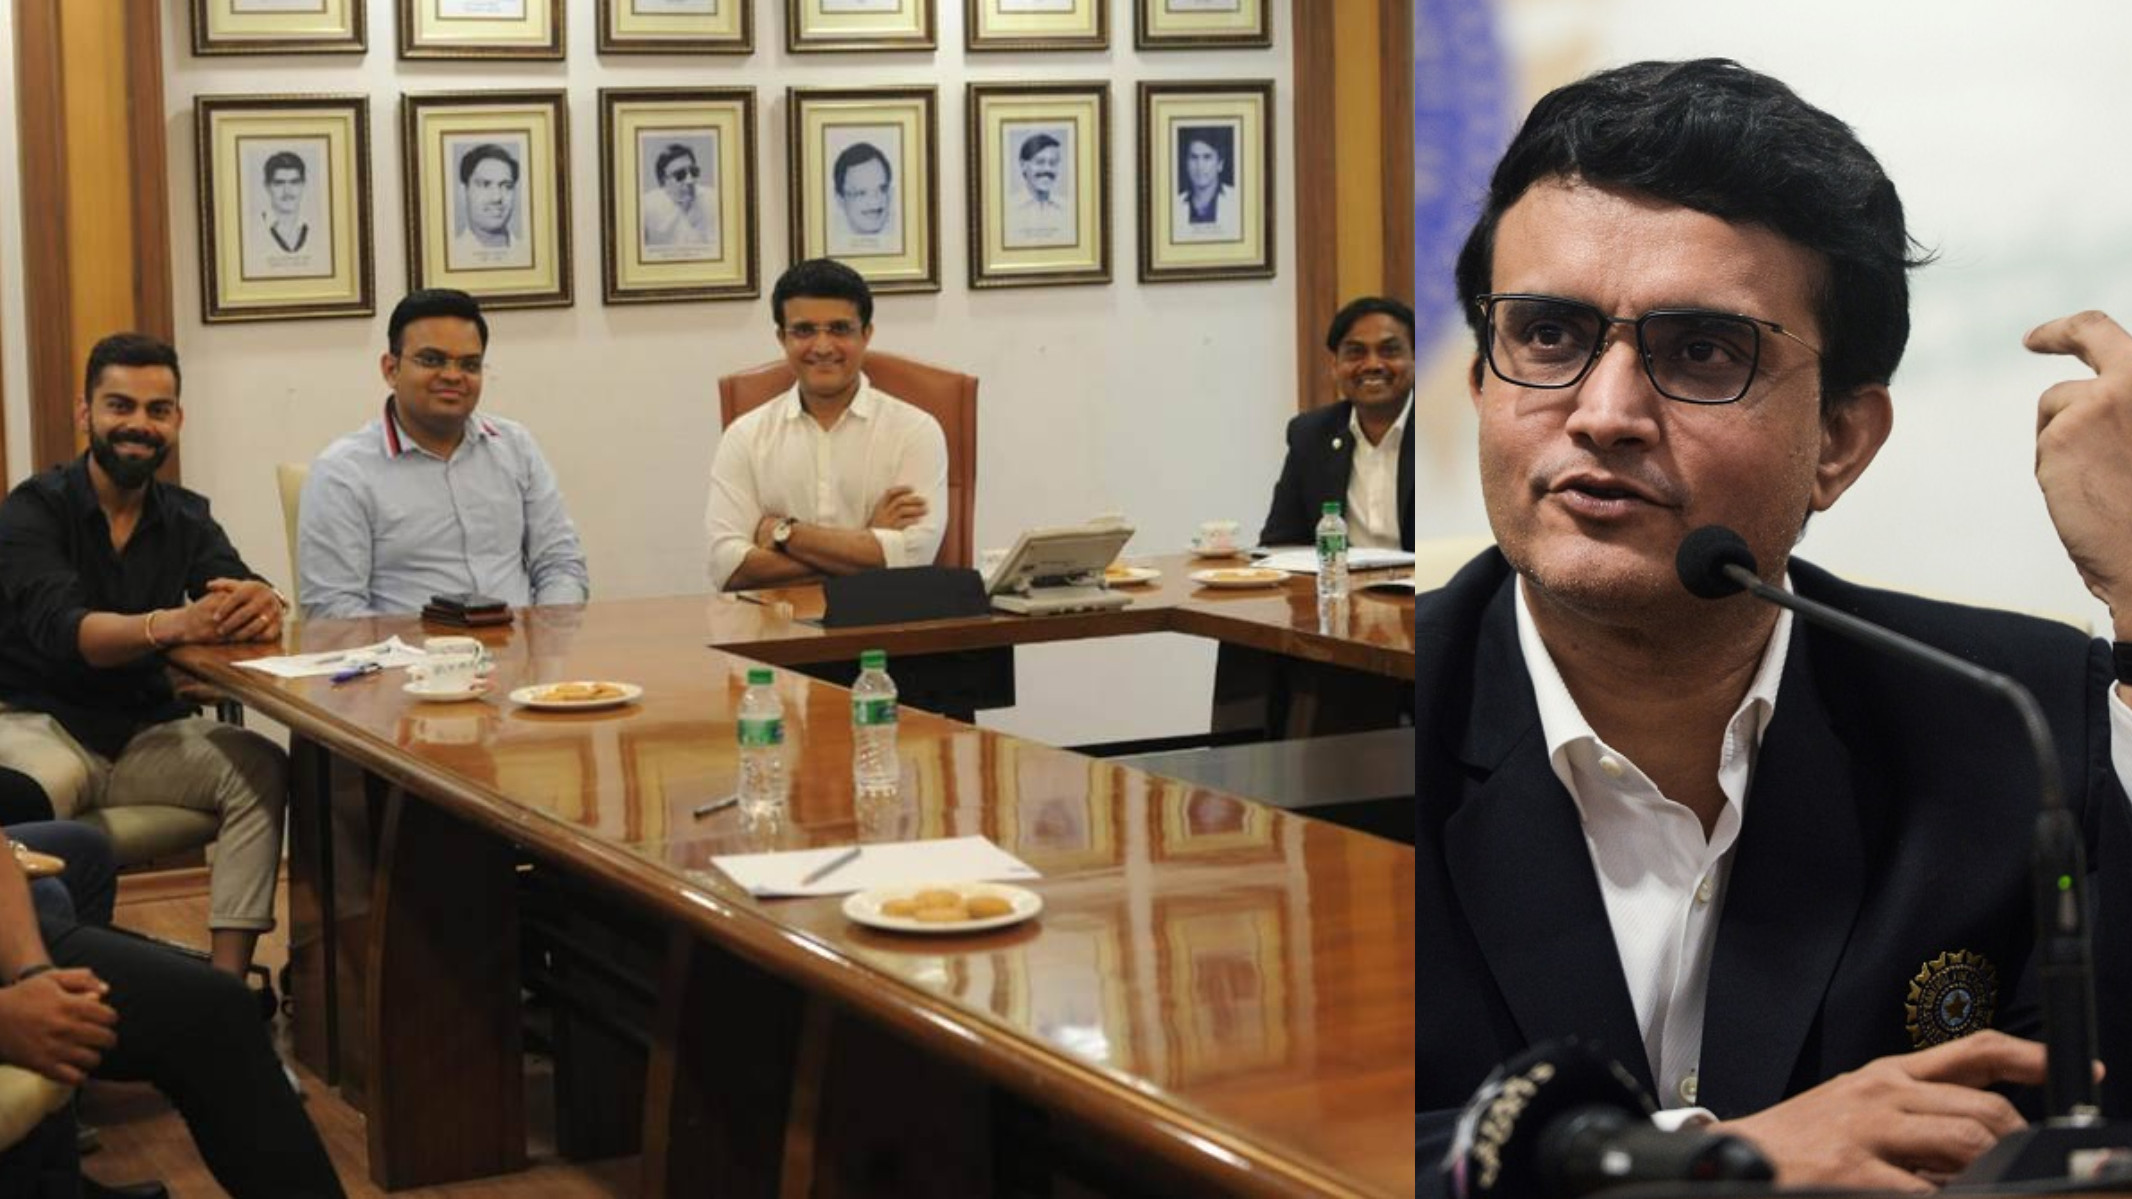 Sourav Ganguly breaks rules by attending selection meetings despite being BCCI president- Report